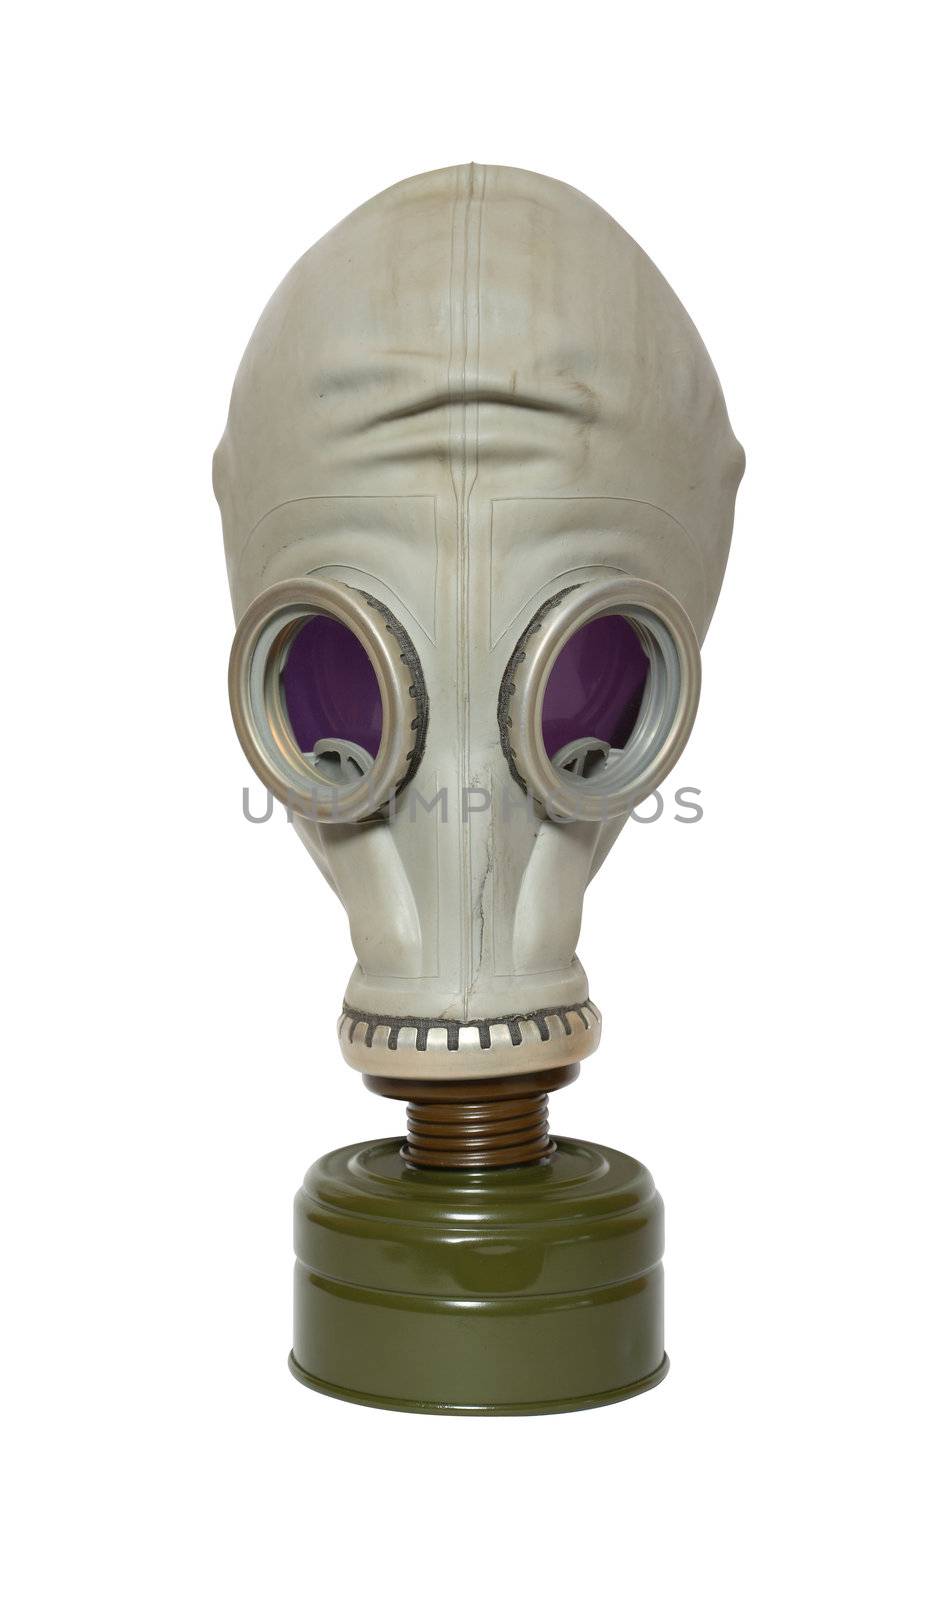 Old gas mask isolated on white background with clipping path